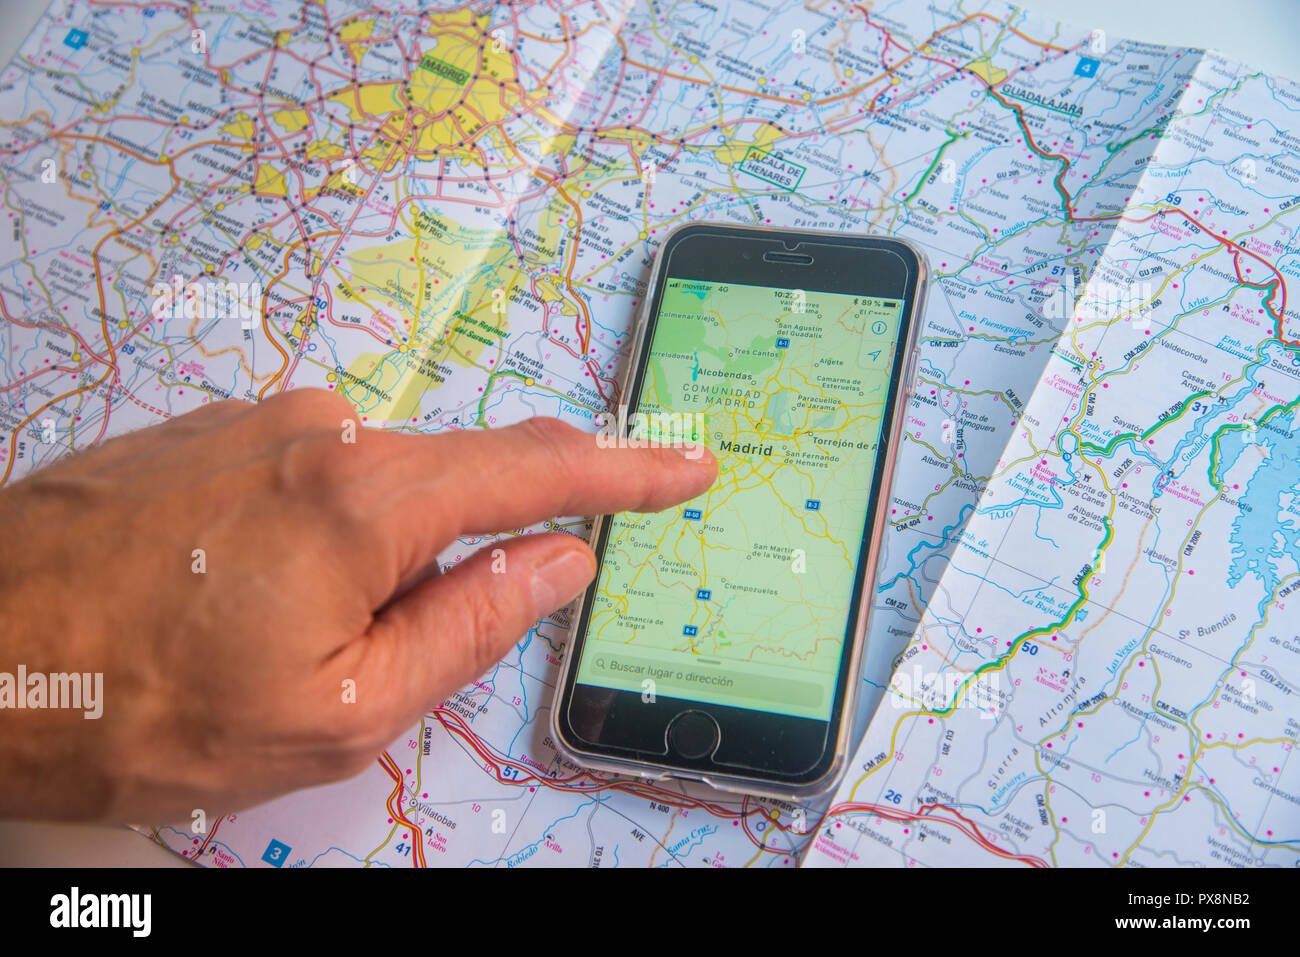 Hand pointing Madrid in the screen of a smartphone placed on a road map showing the same map. Stock Photo